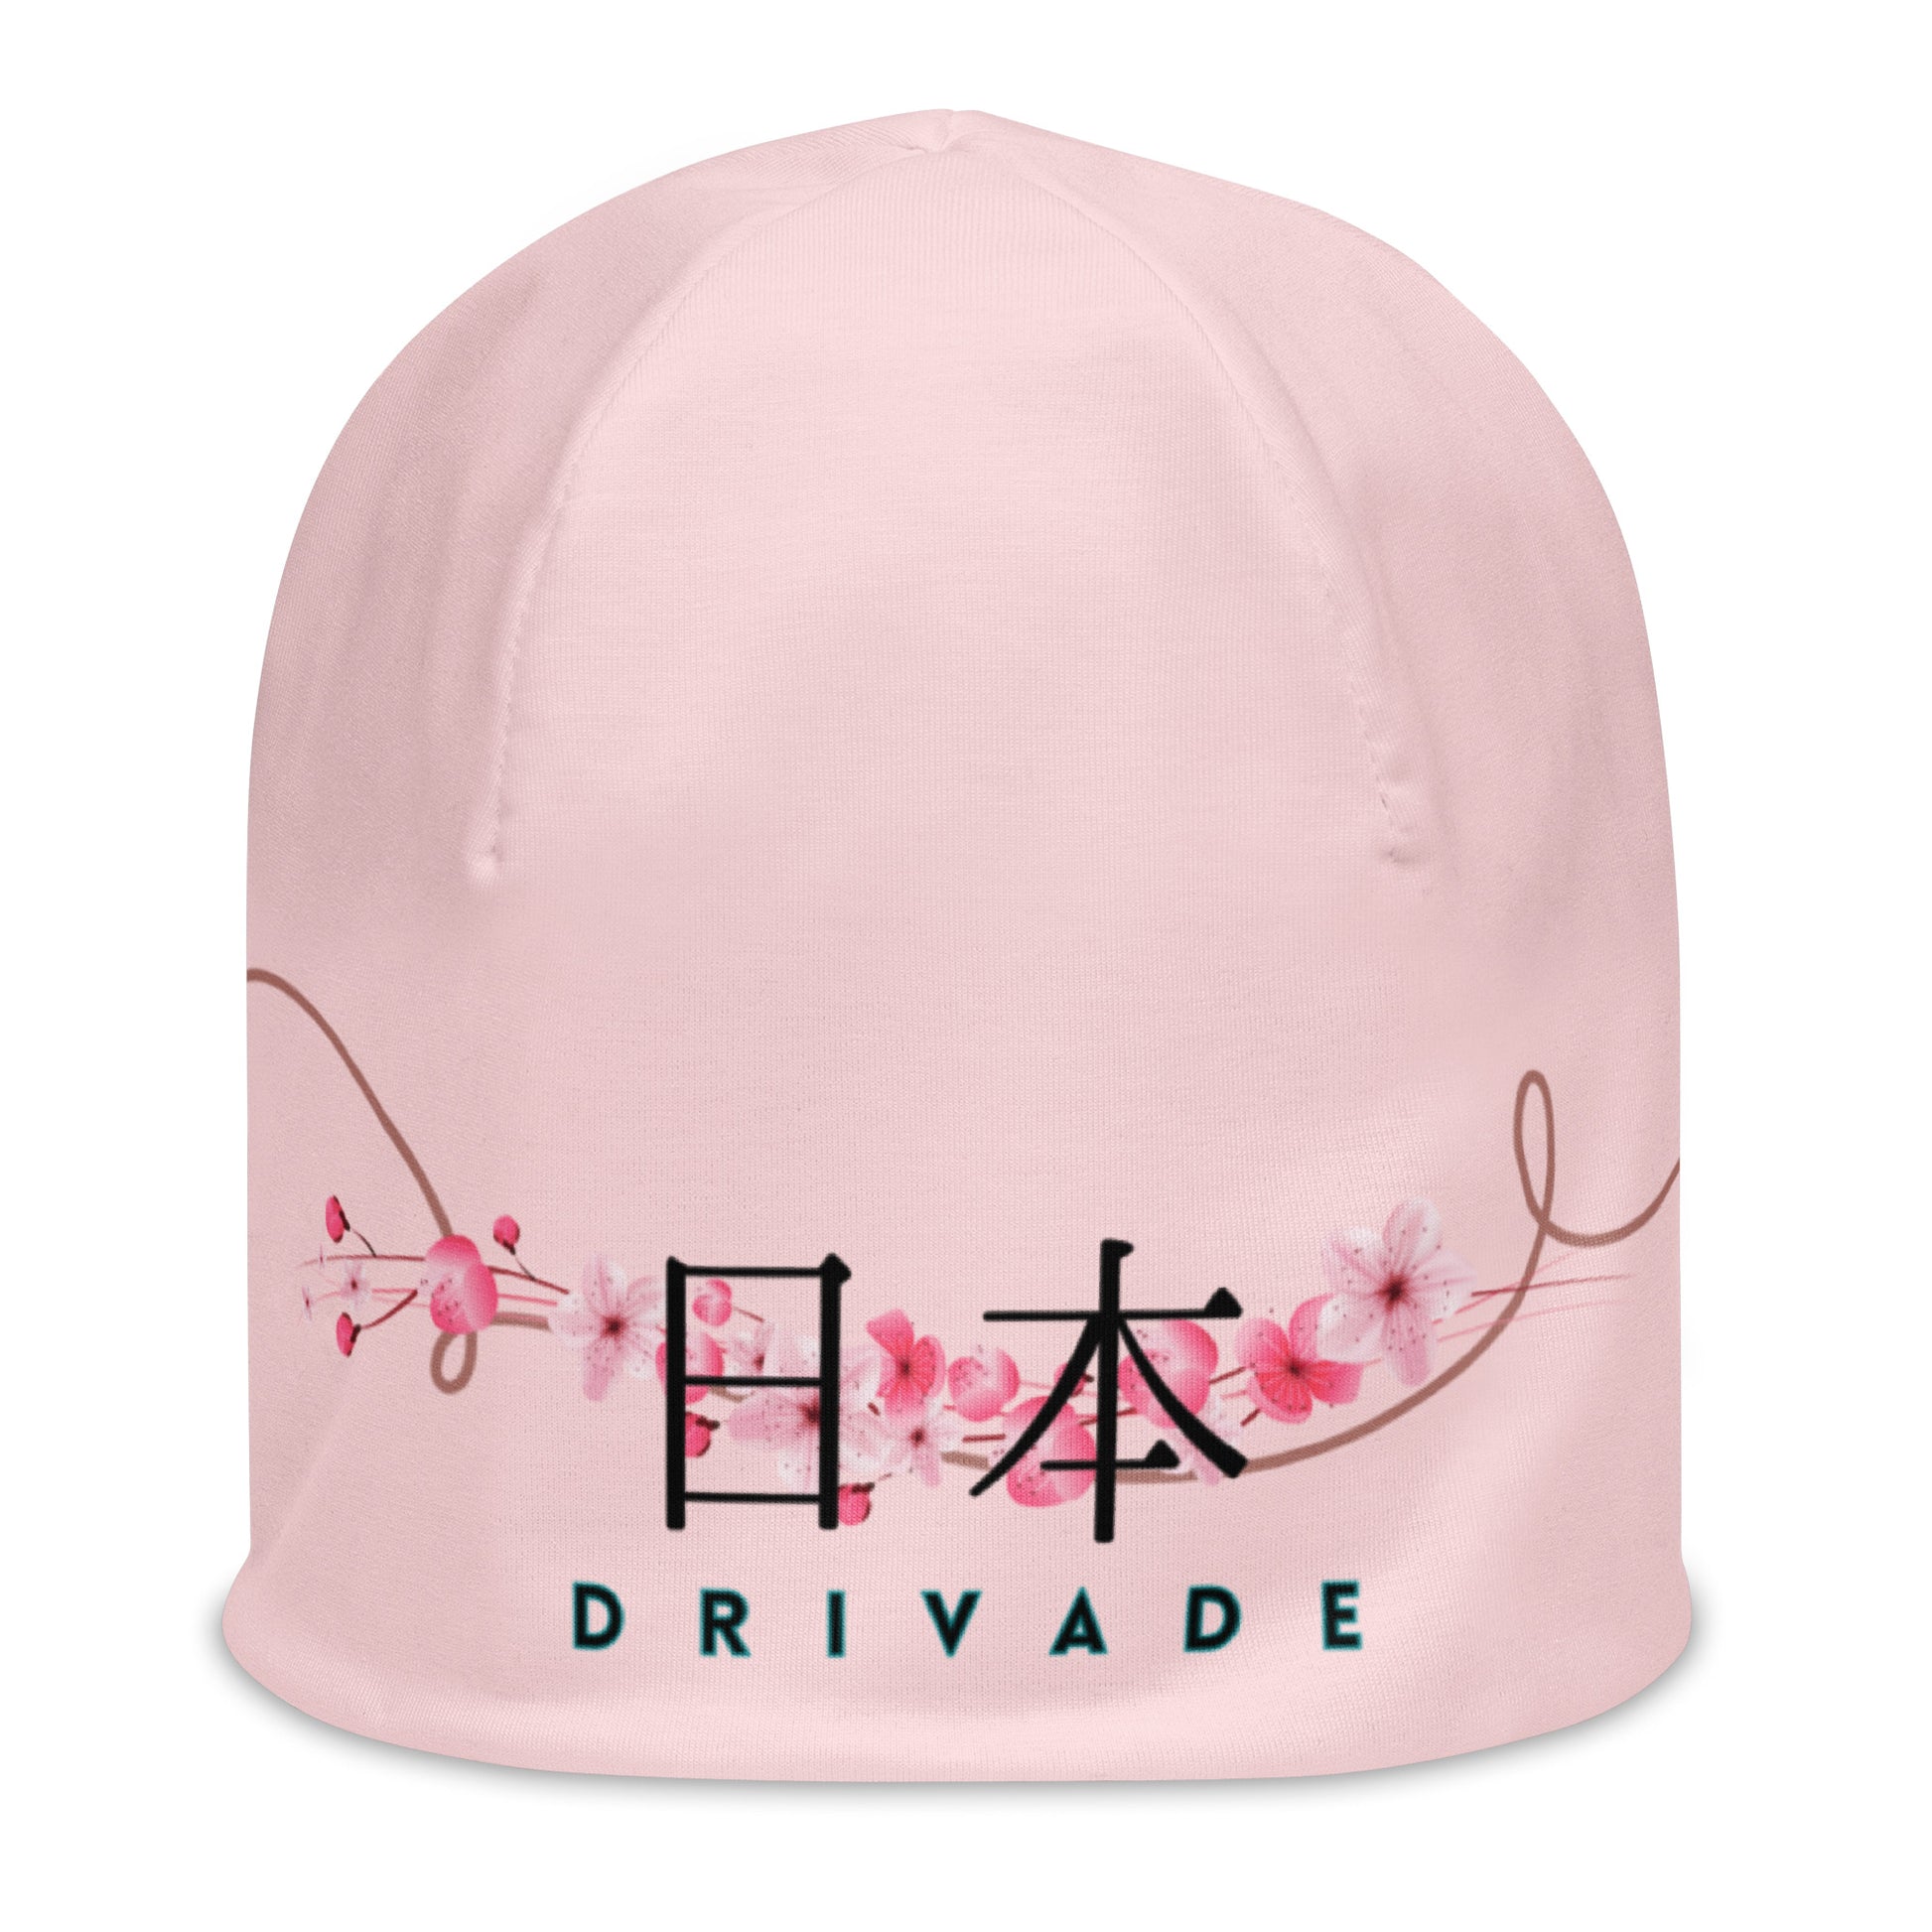 Cherry Blossom Beanie hat - – DRIVADE Pink